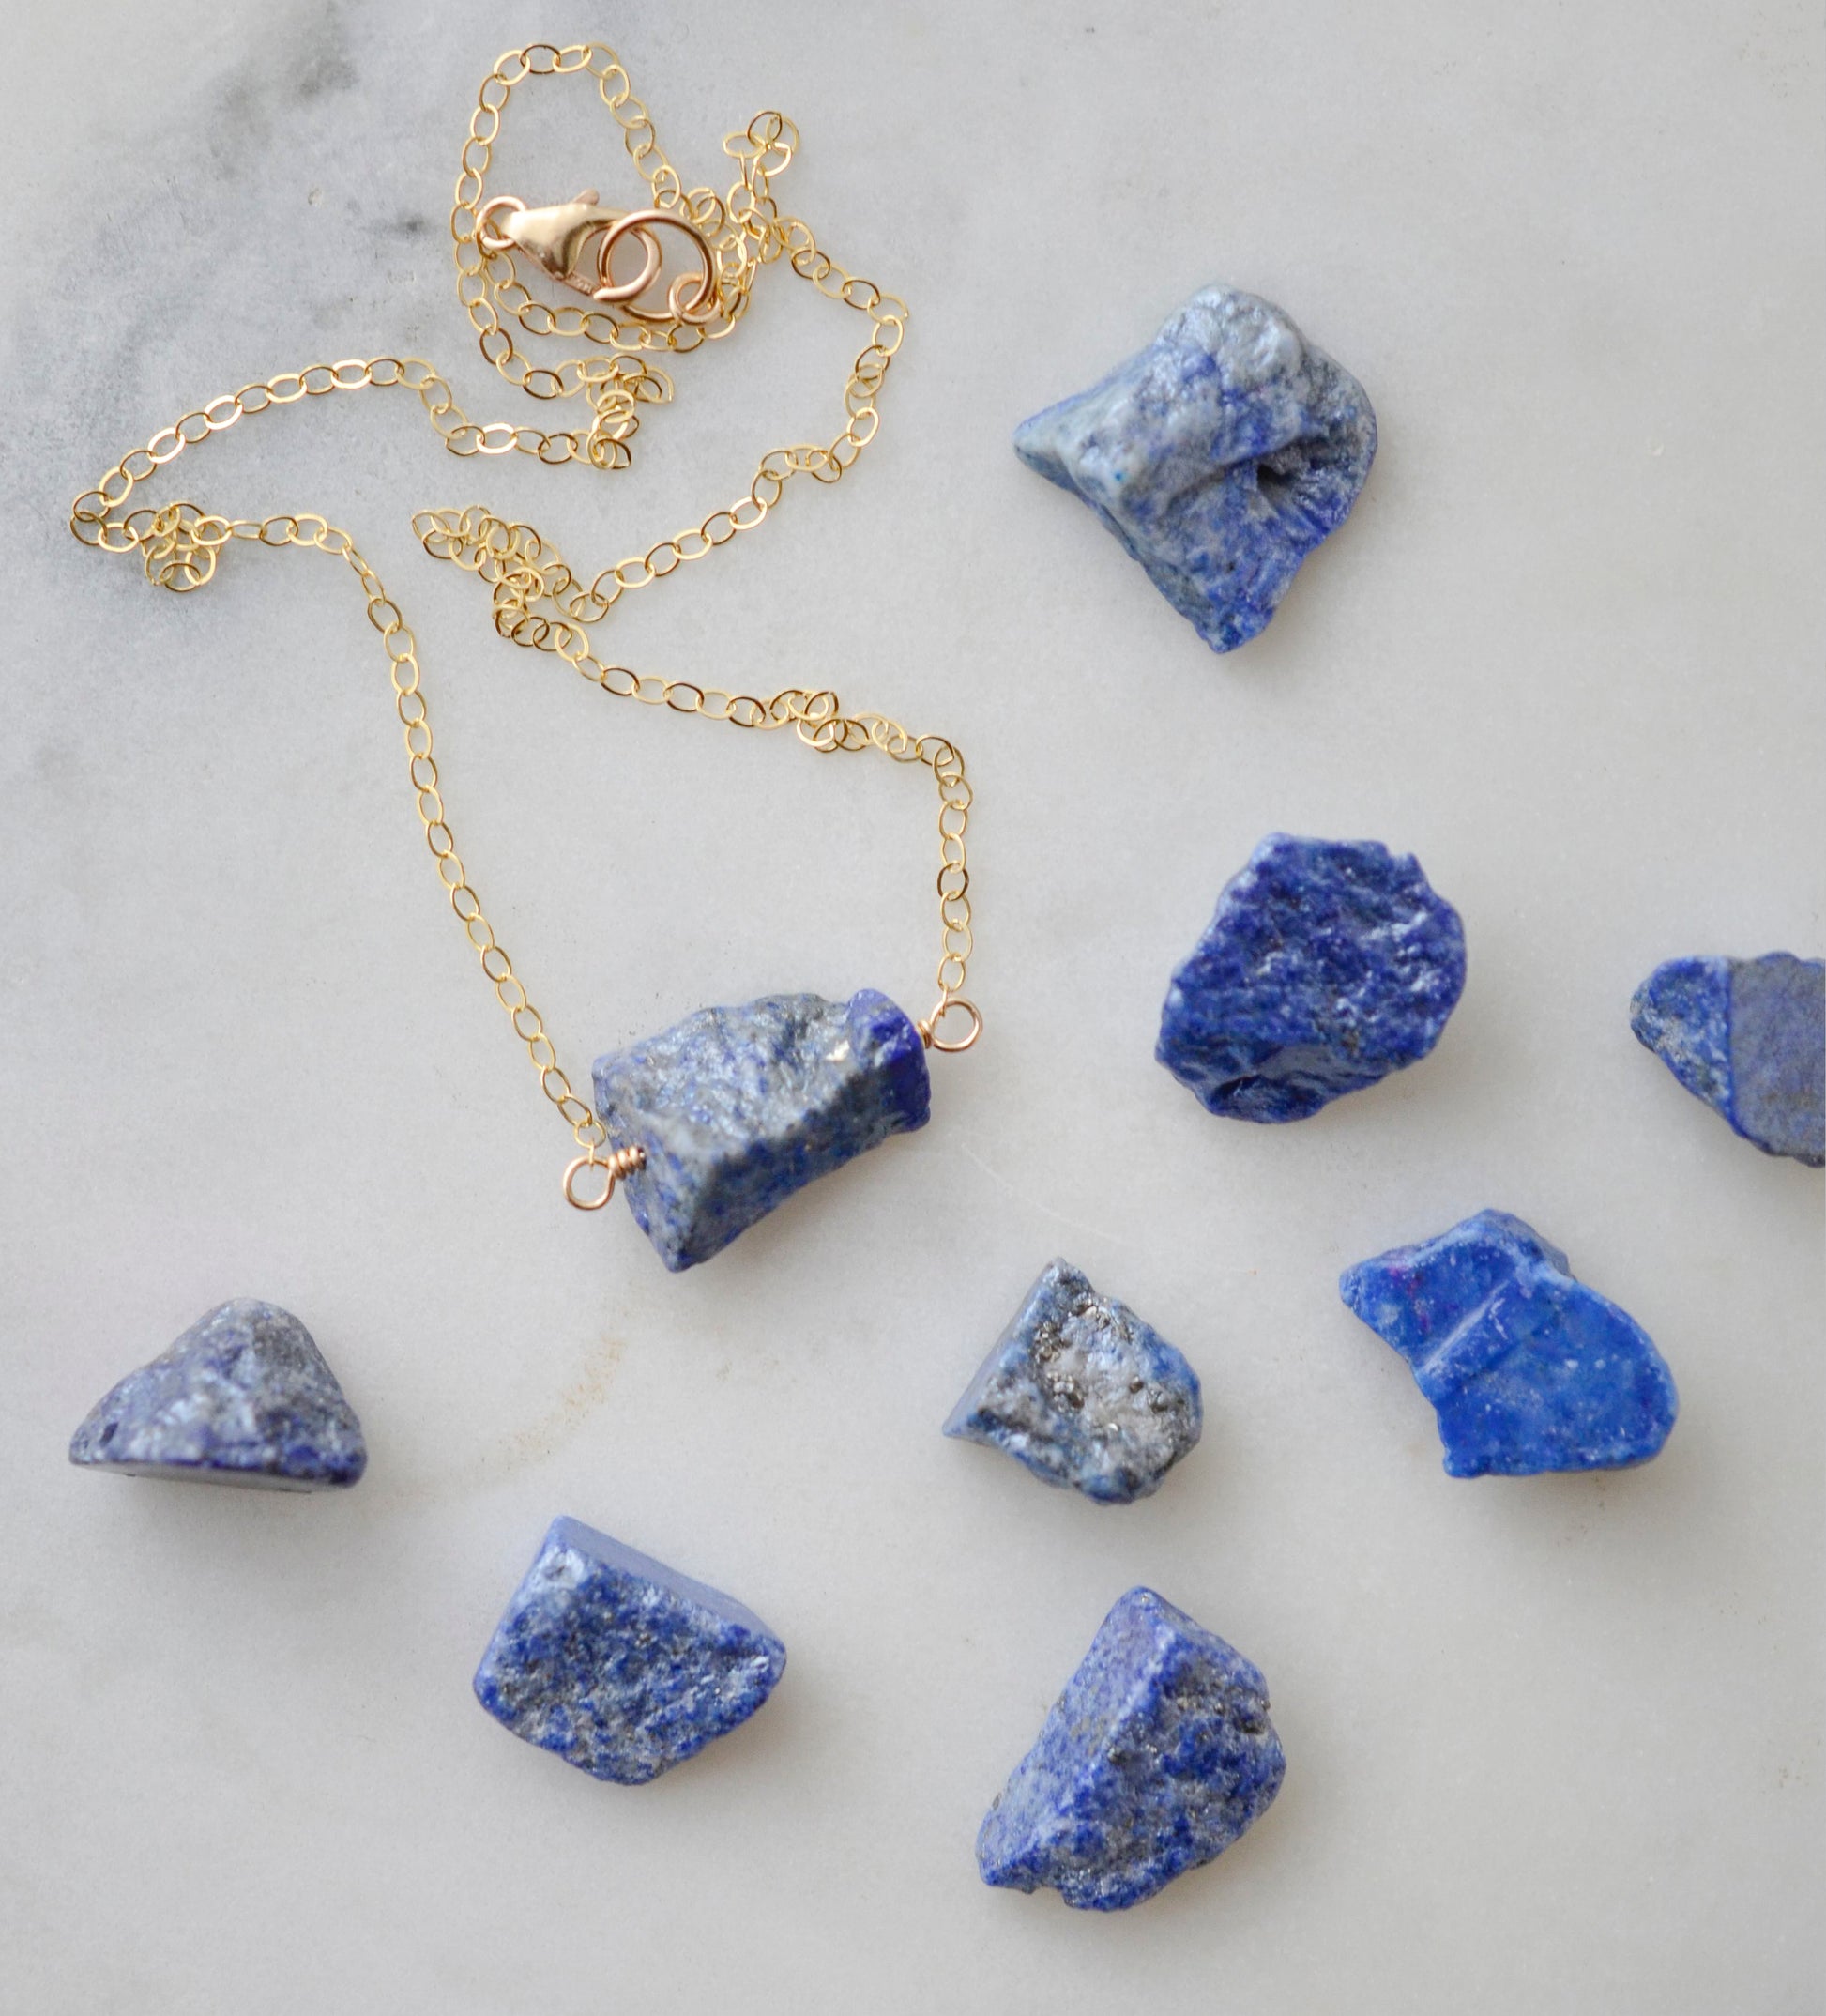 Raw blue lapis lazuli stone suspended from a gold chain. Other available stones shown.